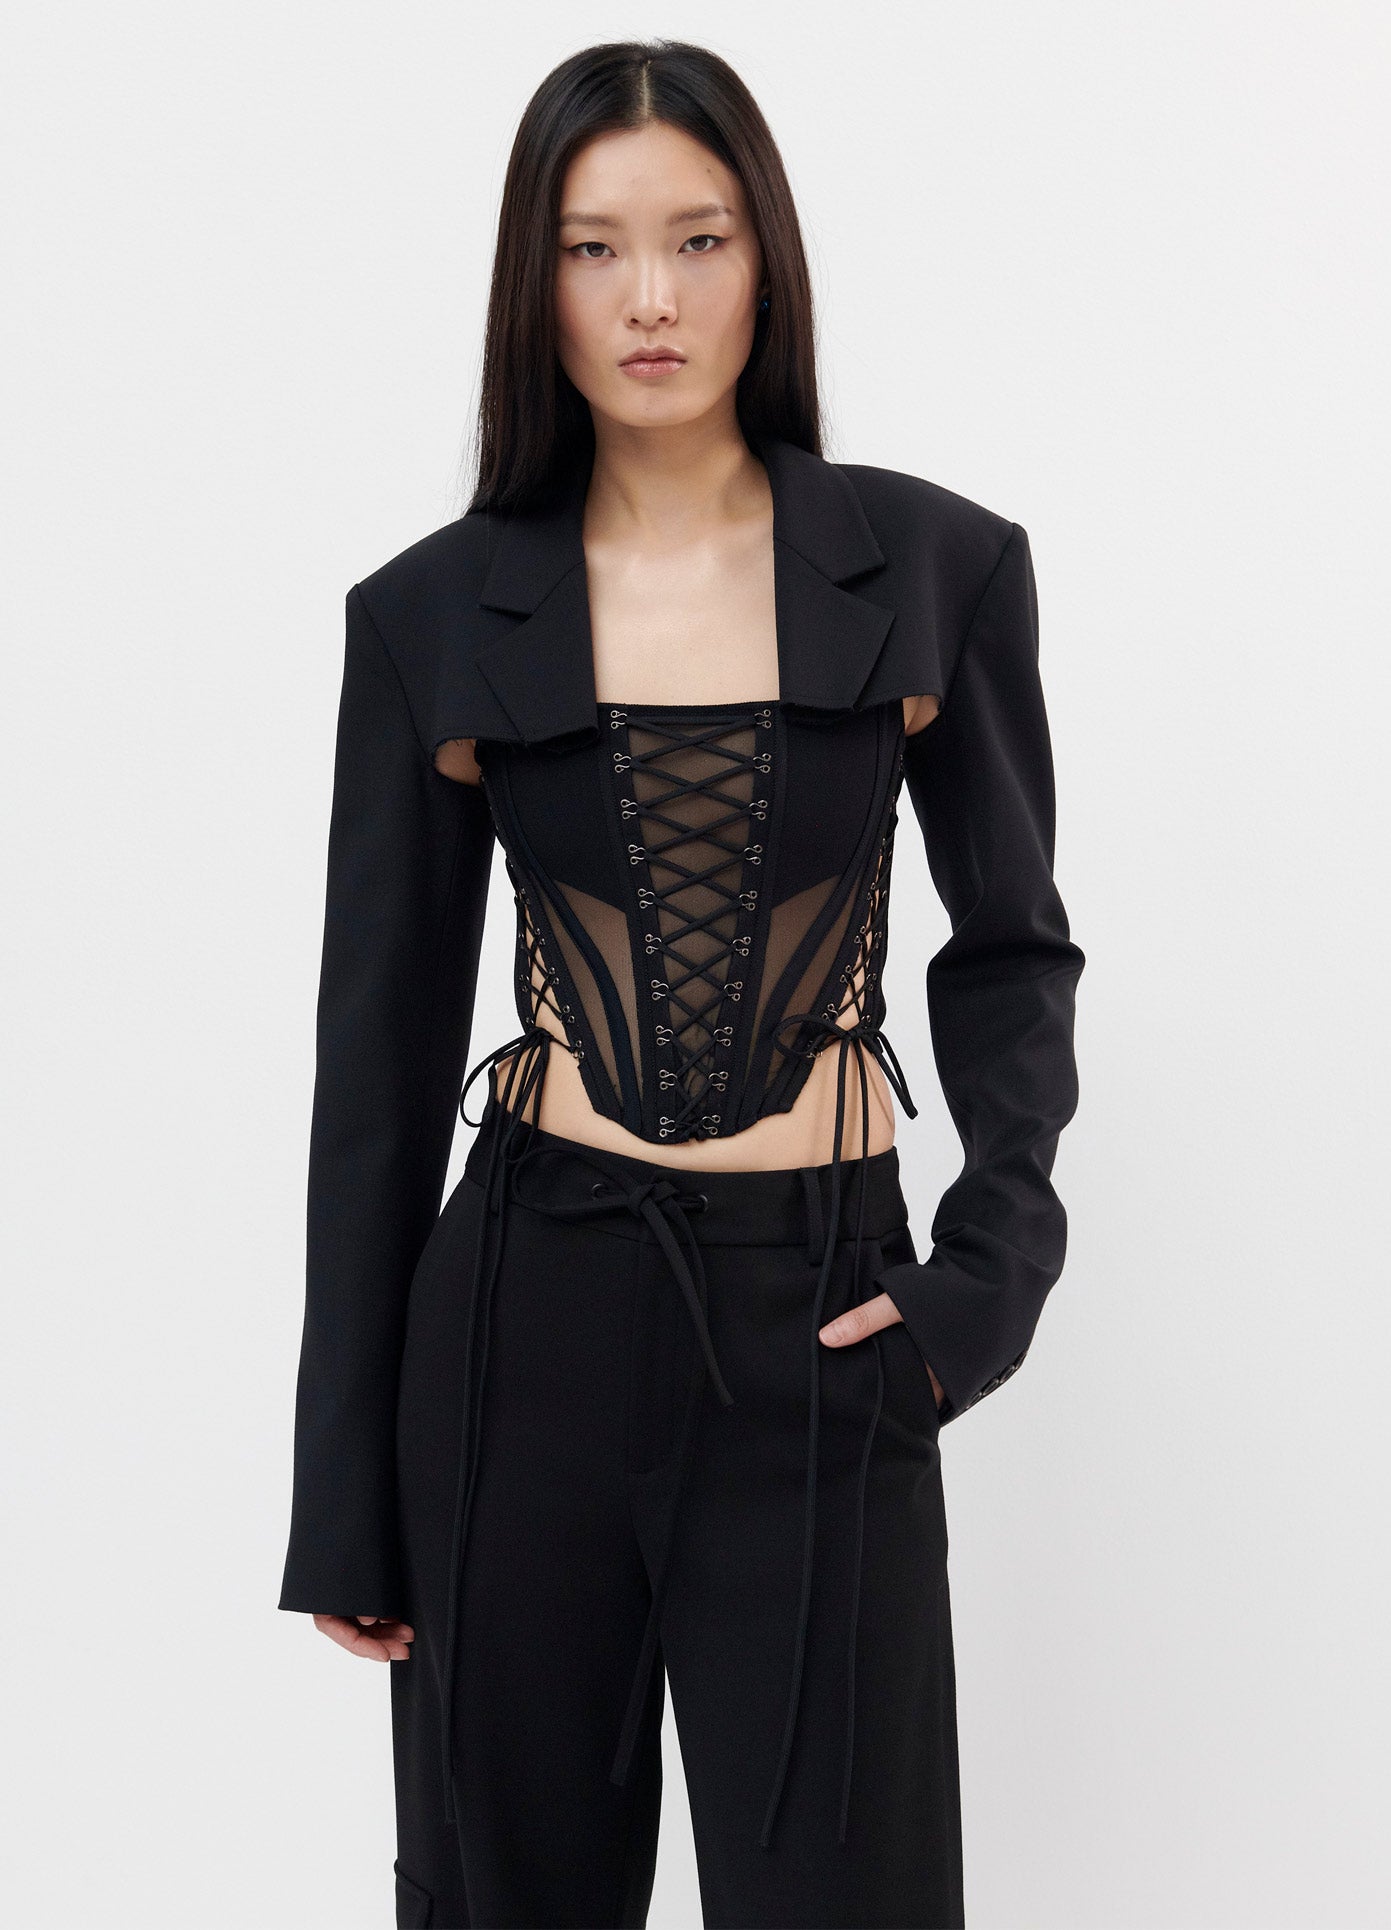 MONSE Cropped Jacket in Black on Model Front View